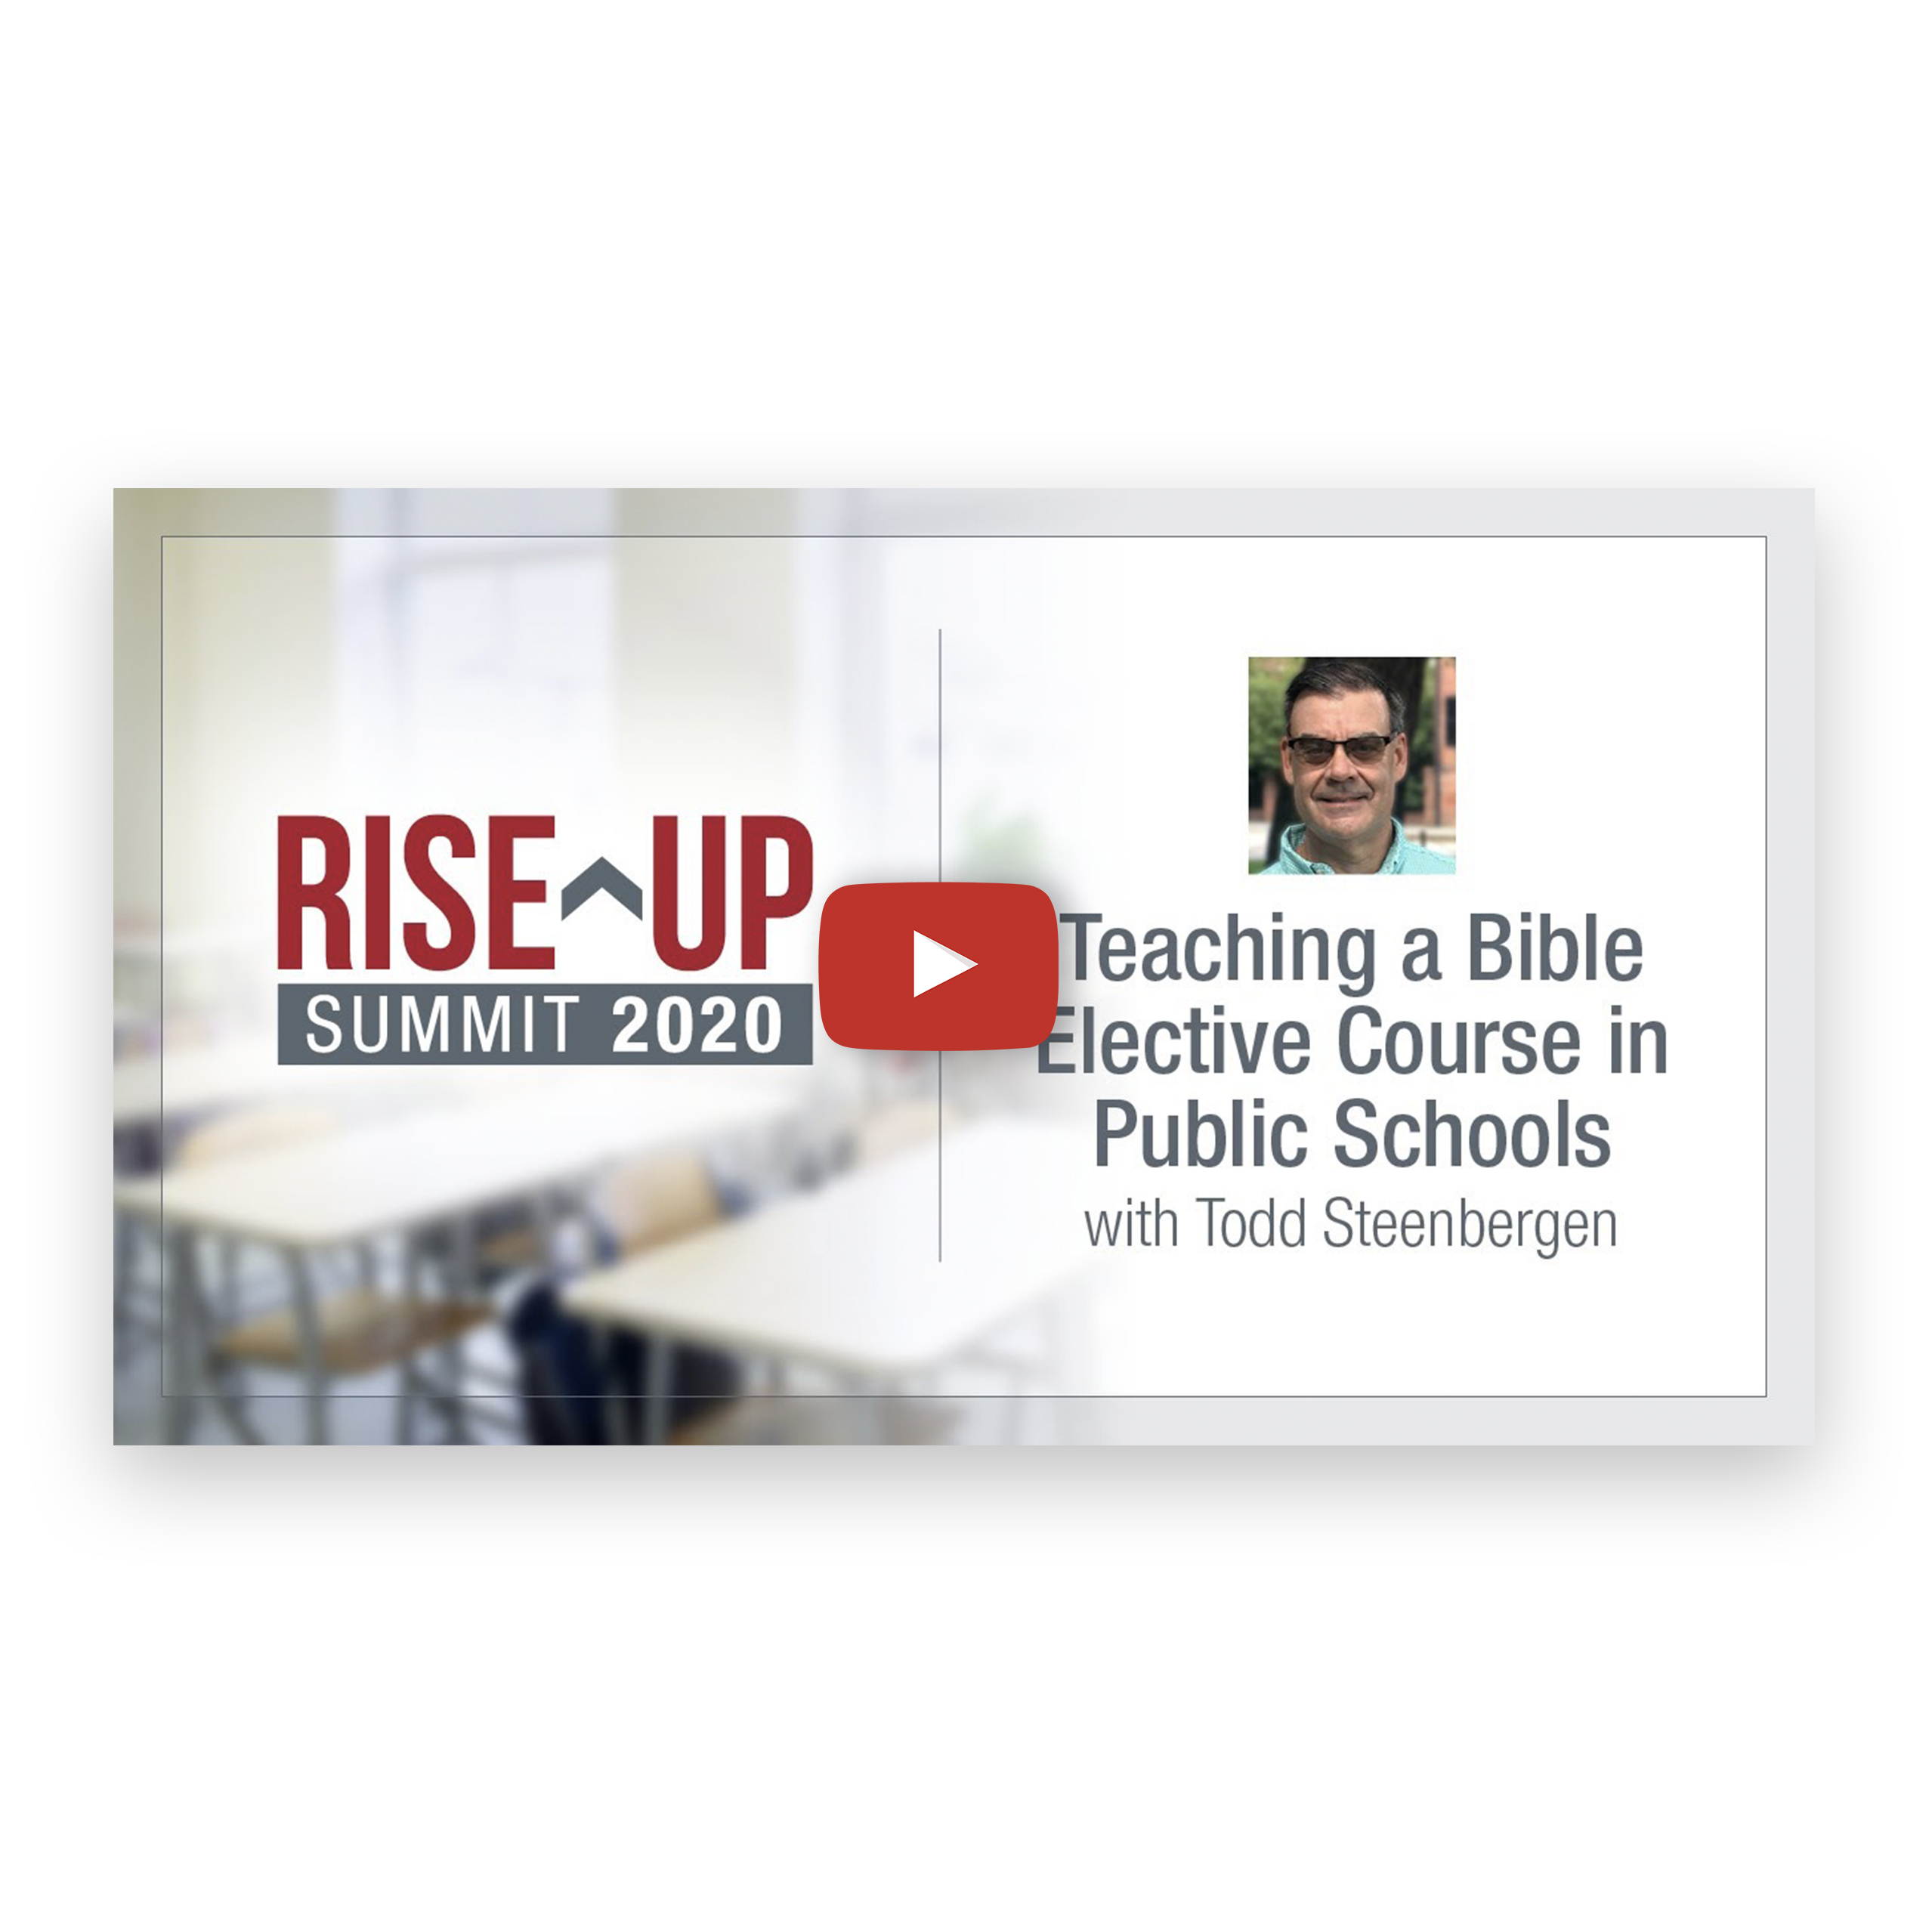 Teaching a Bible Elective Course in Public Schools